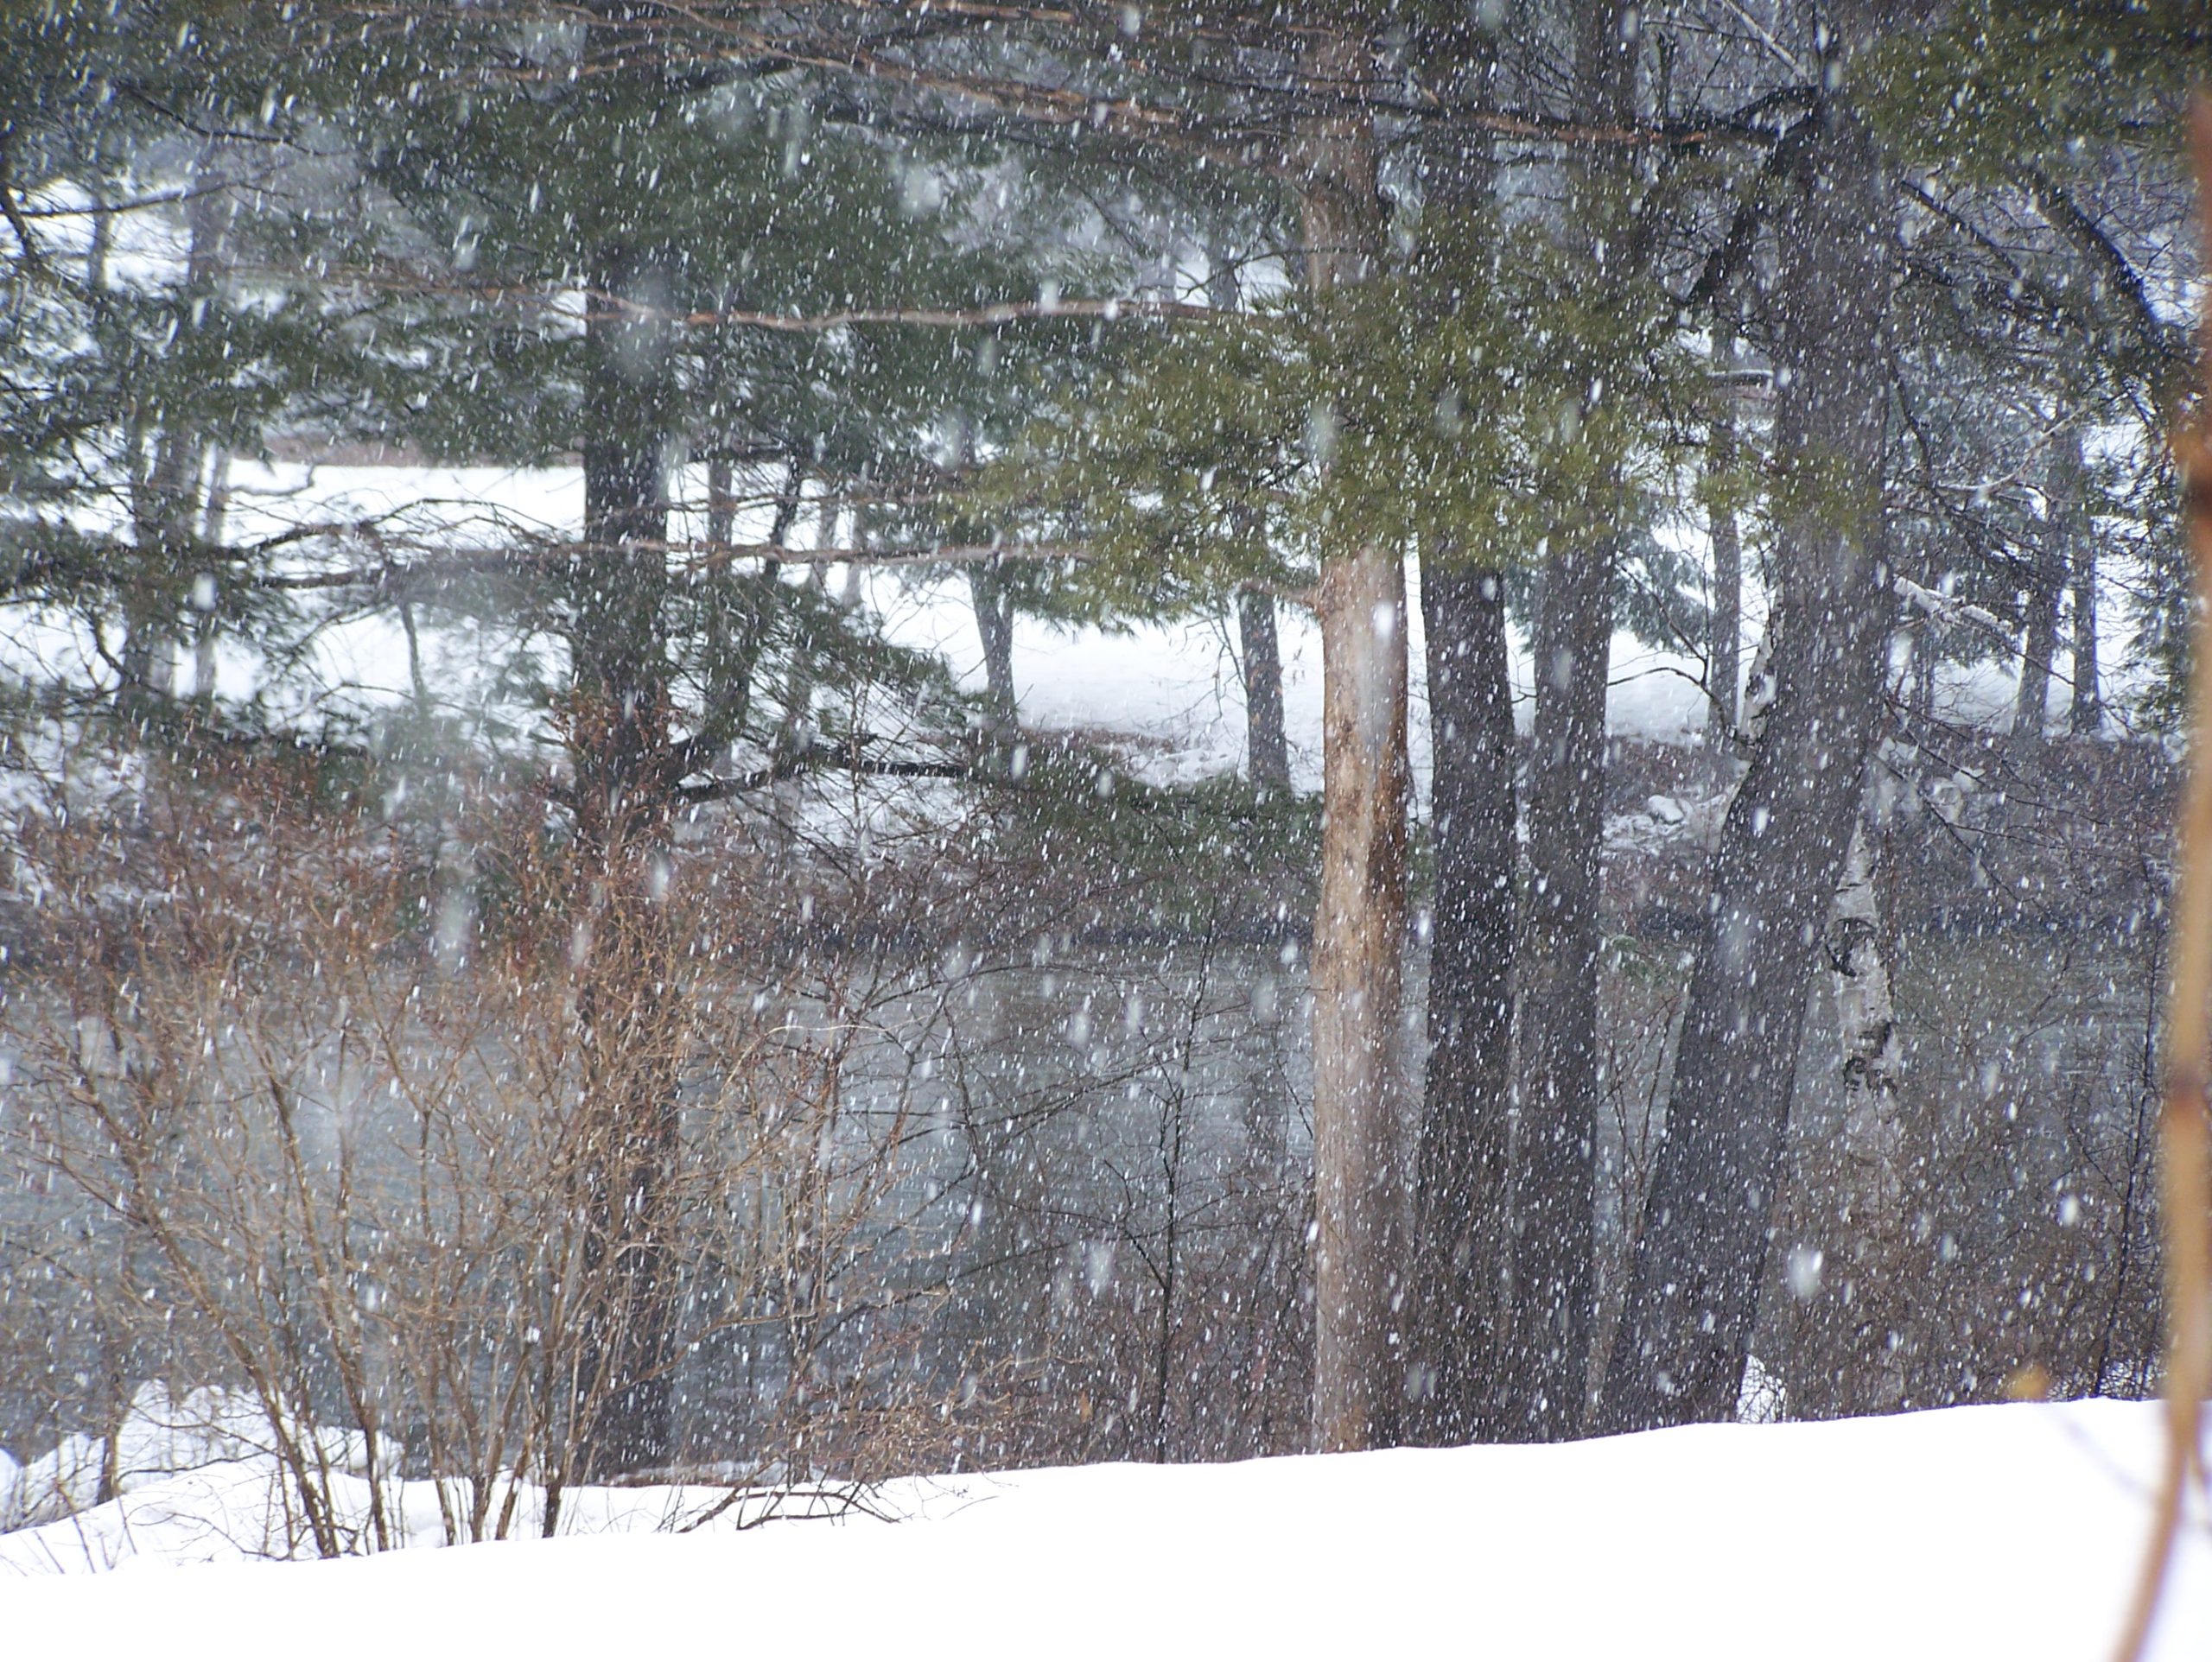 Winter Storm On Saco River (user submitted)